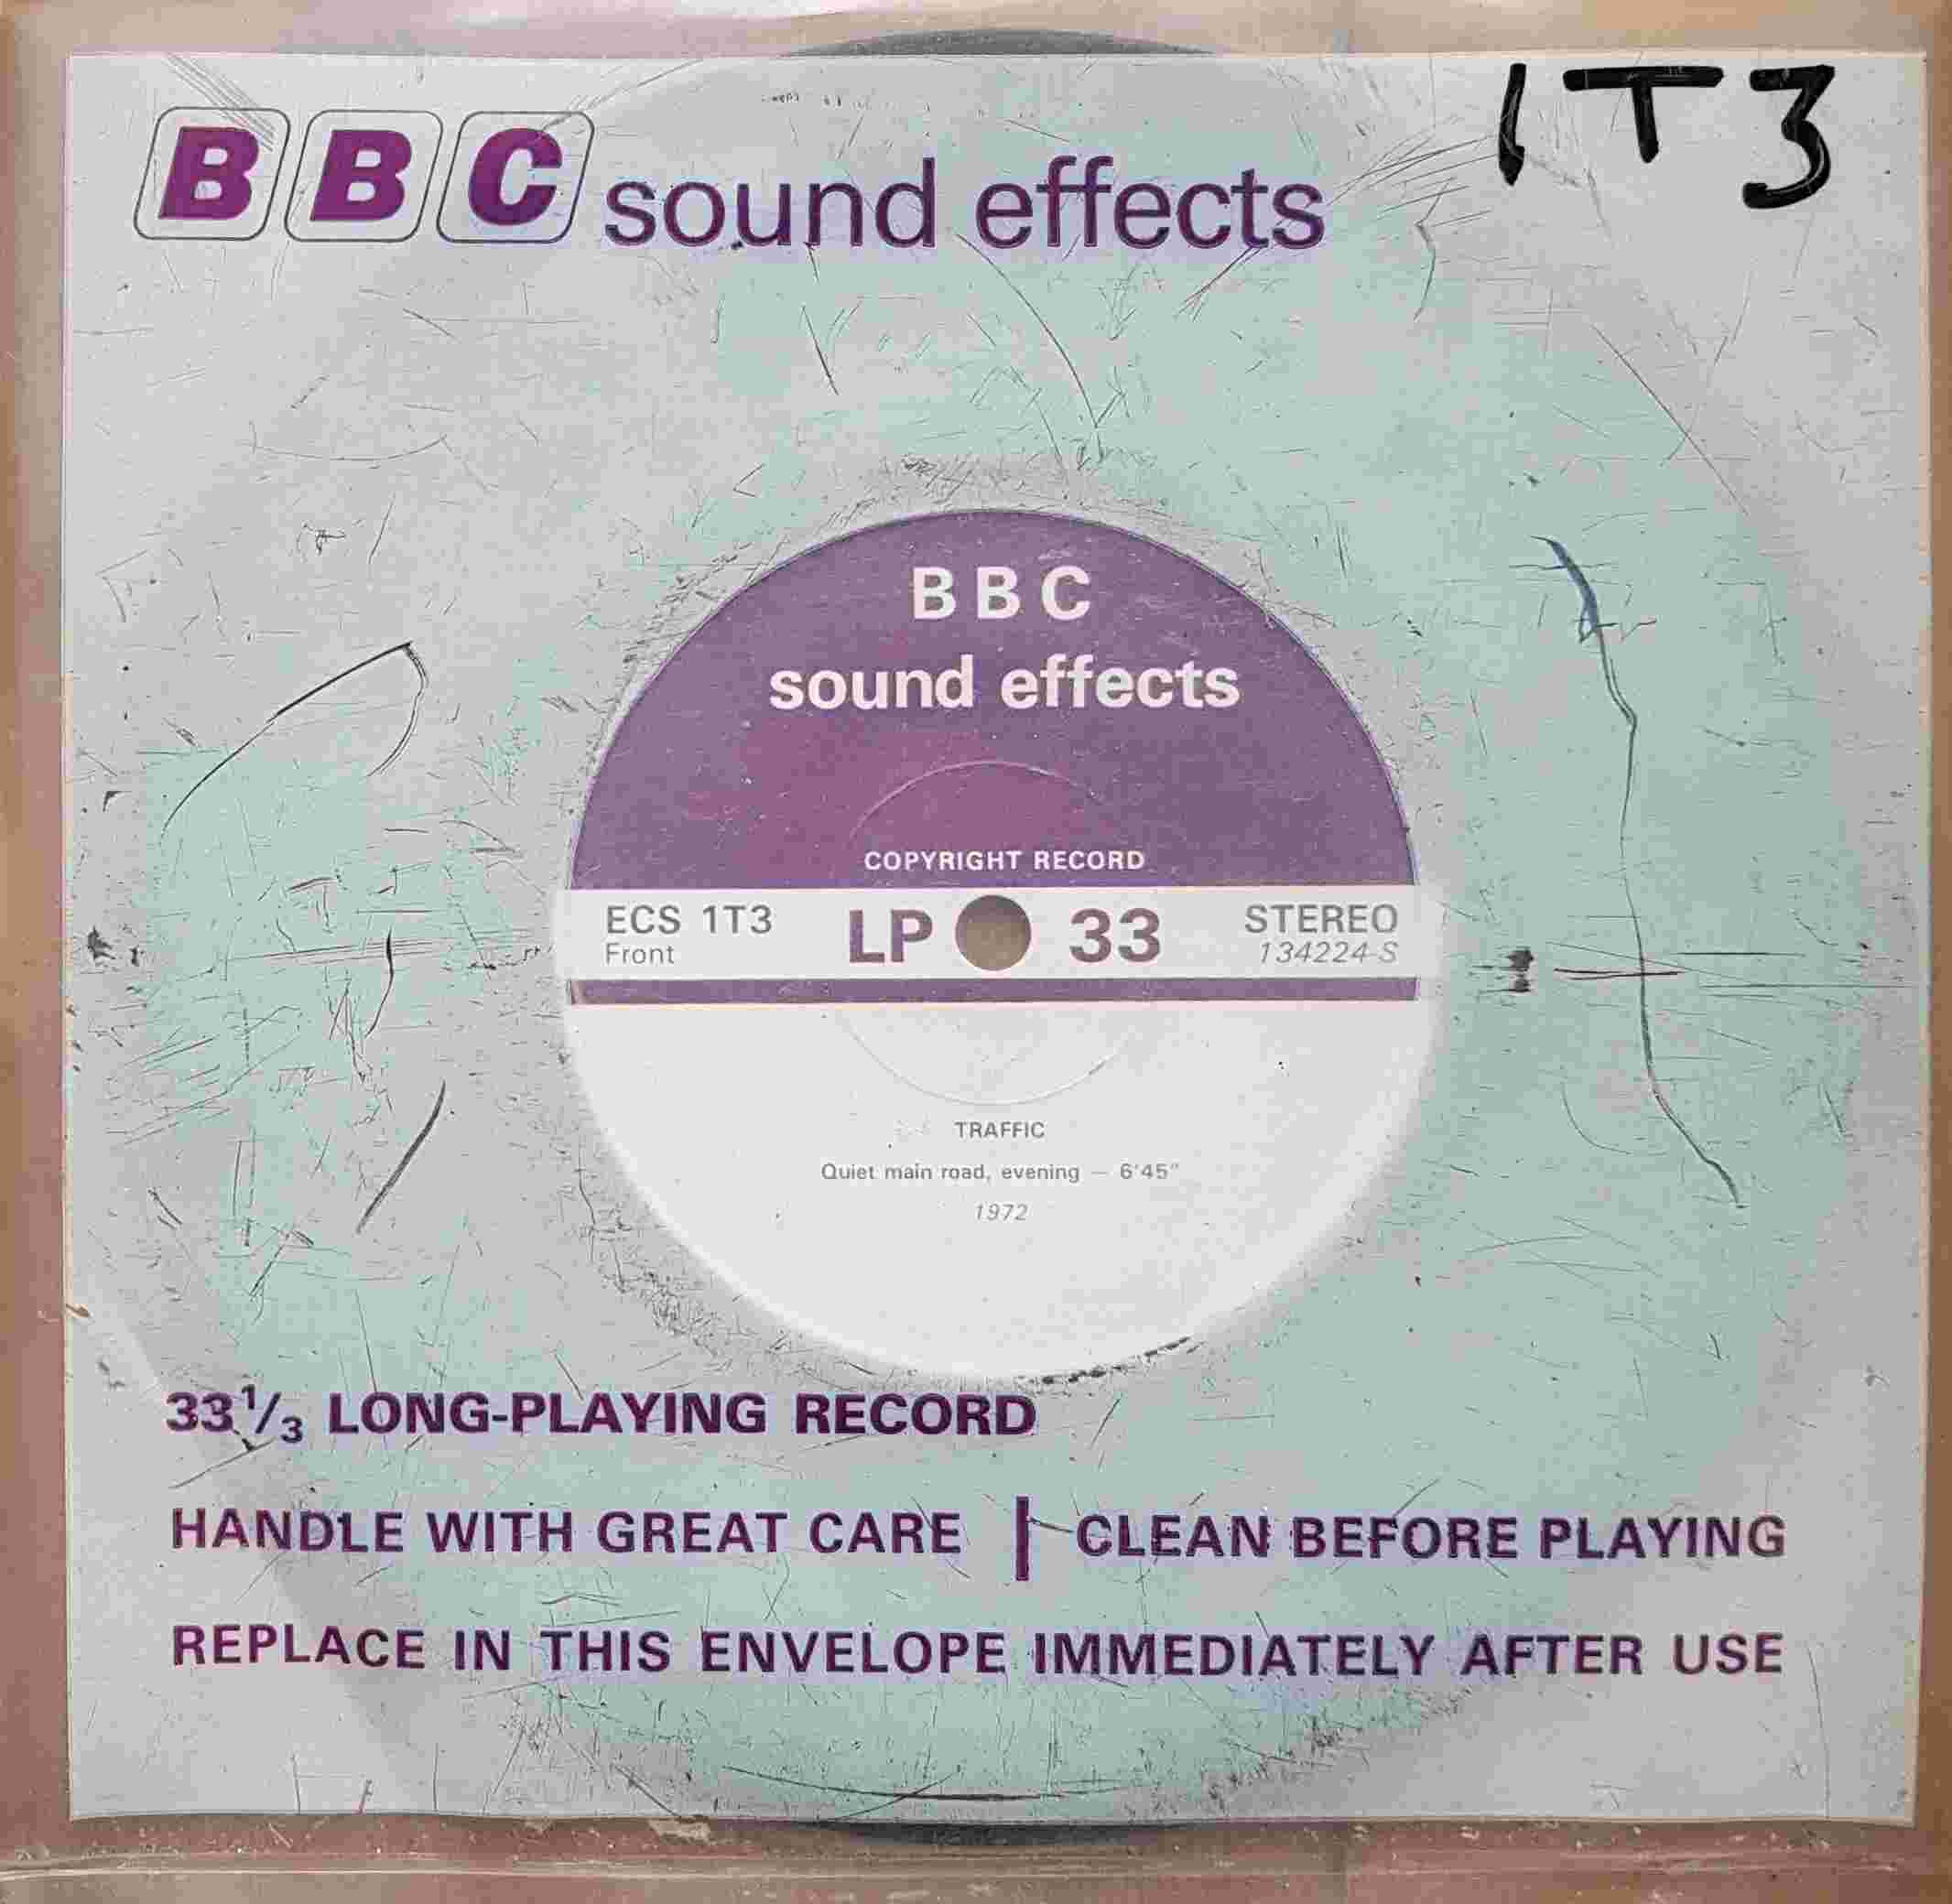 Picture of ECS 1T3 Traffic by artist Not registered from the BBC records and Tapes library